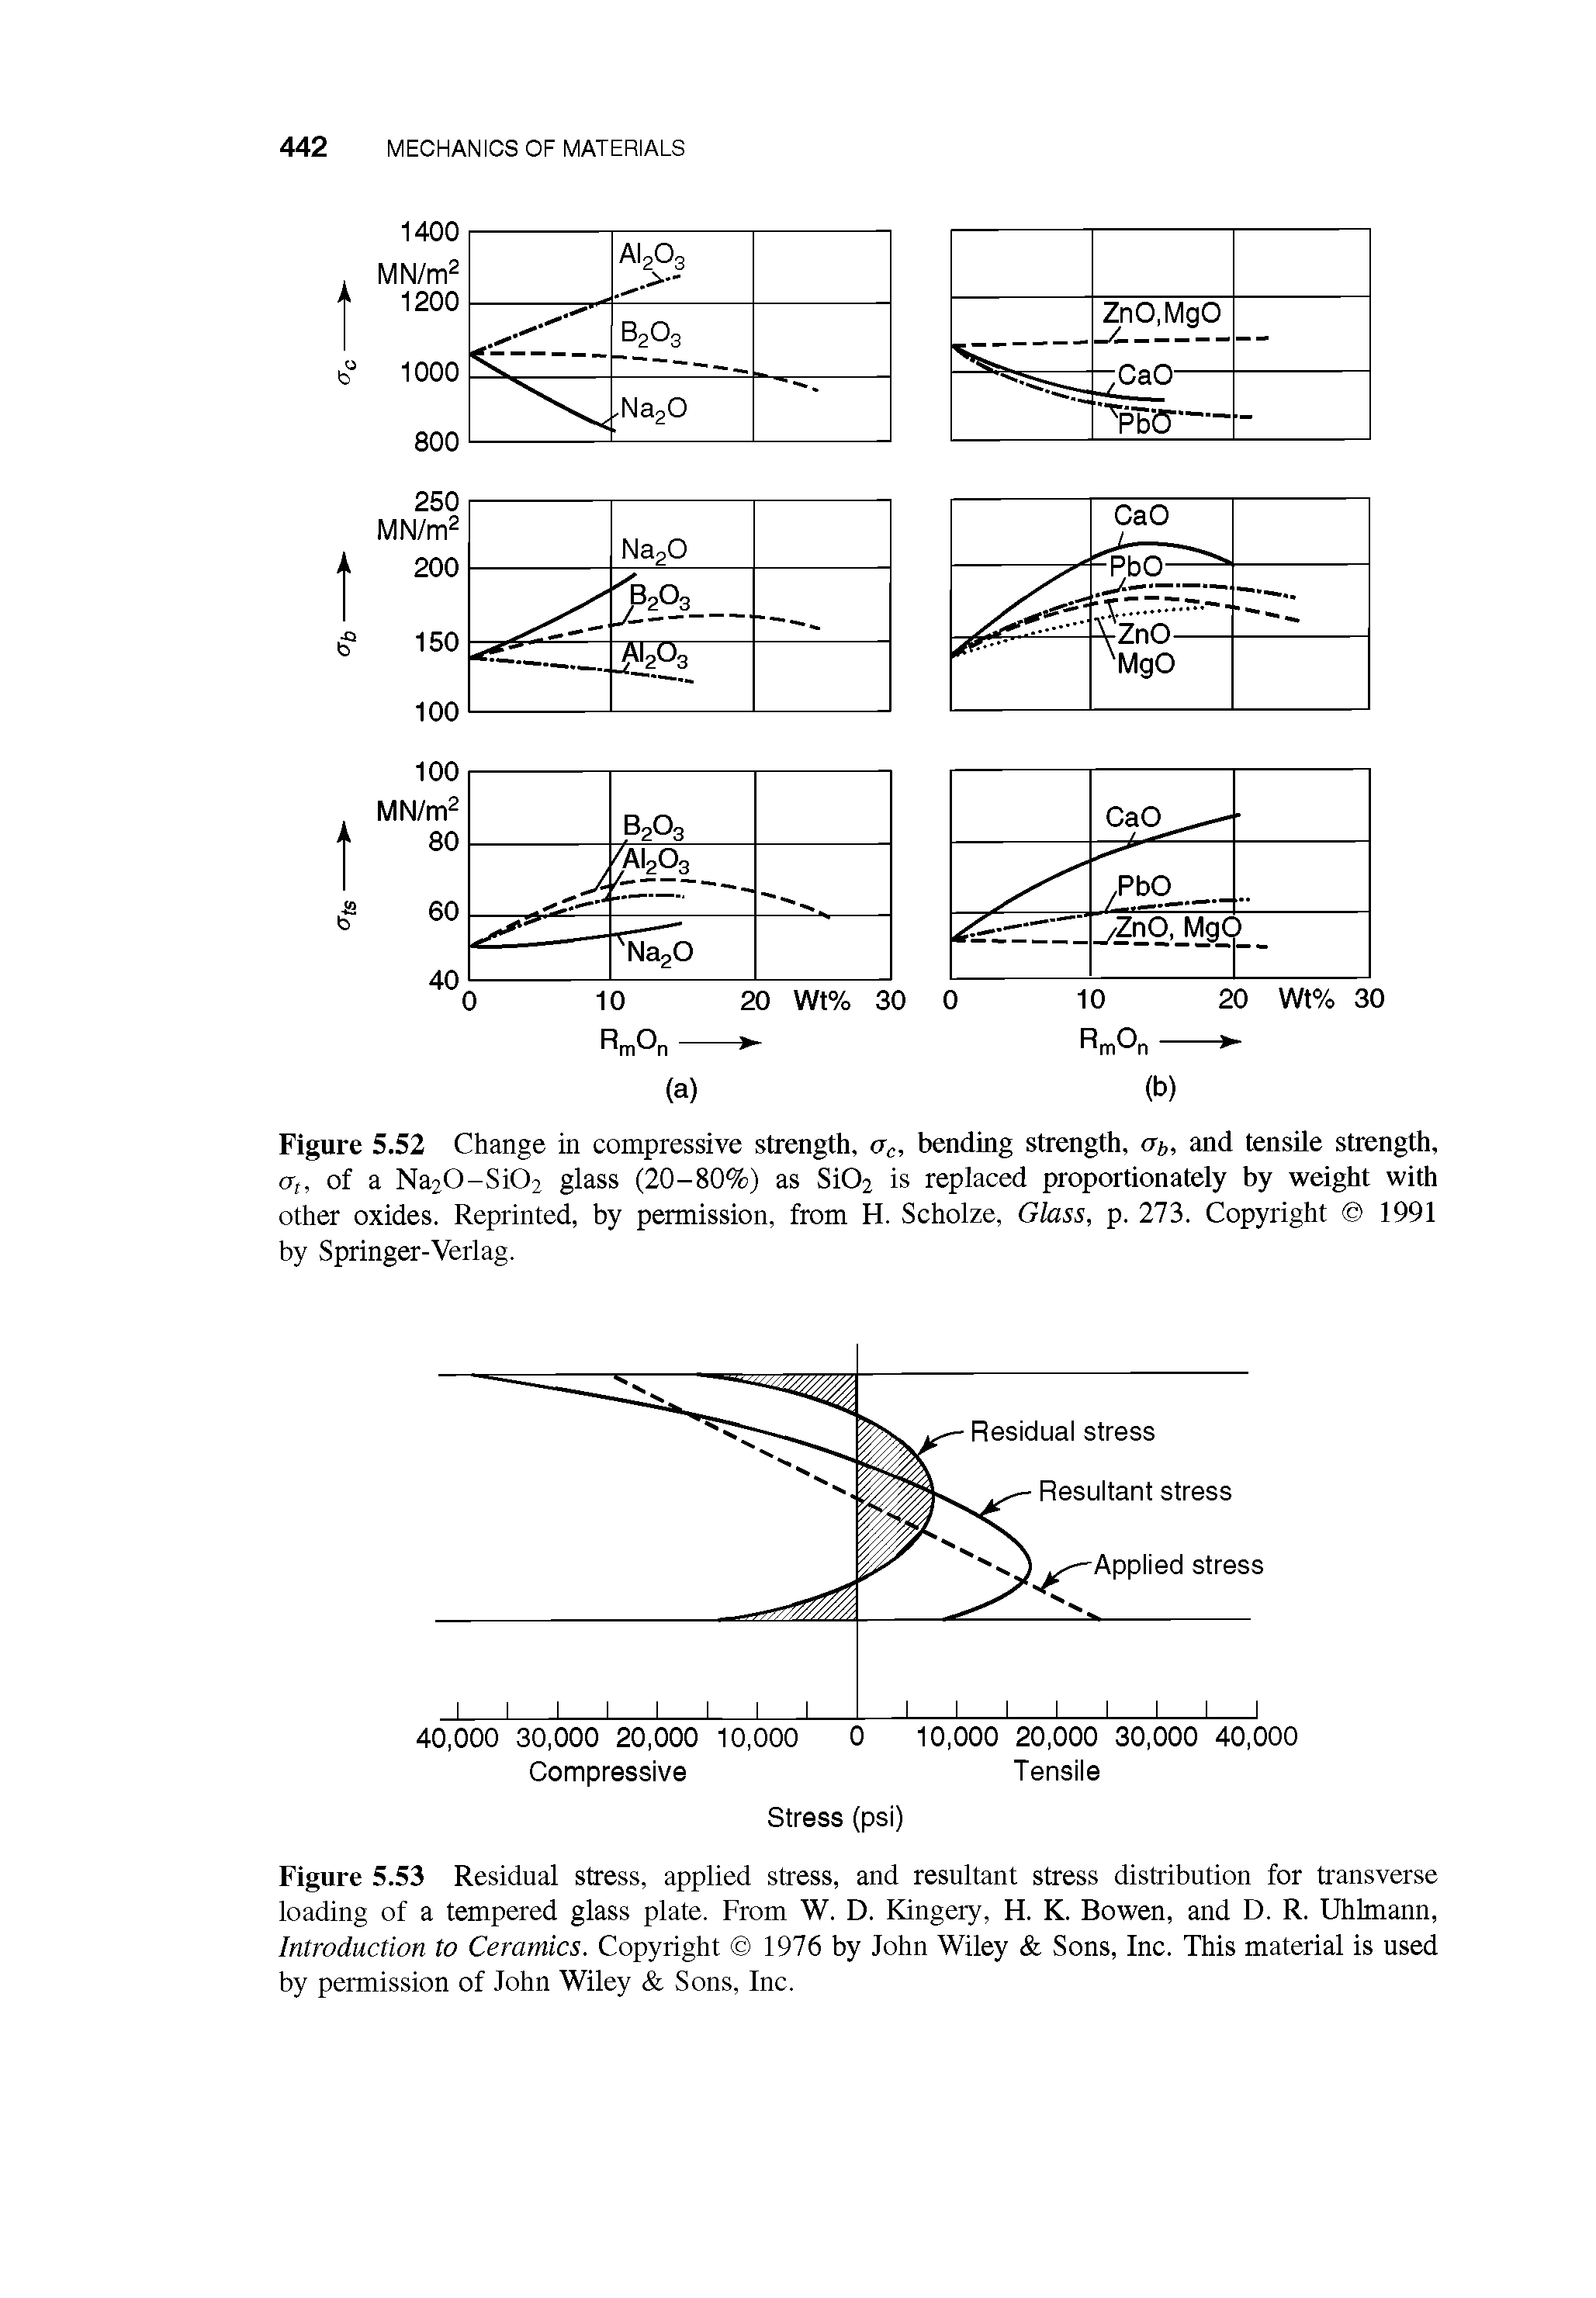 Figure 5.53 Residual stress, applied stress, and resultant stress distribution for transverse loading of a tempered glass plate. From W. D. Kingery, H. K. Bowen, and D. R. Uhknann, Introduction to Ceramics. Copyright 1976 by John Wiley Sons, Inc. This material is used by permission of John Wiley Sons, Inc.